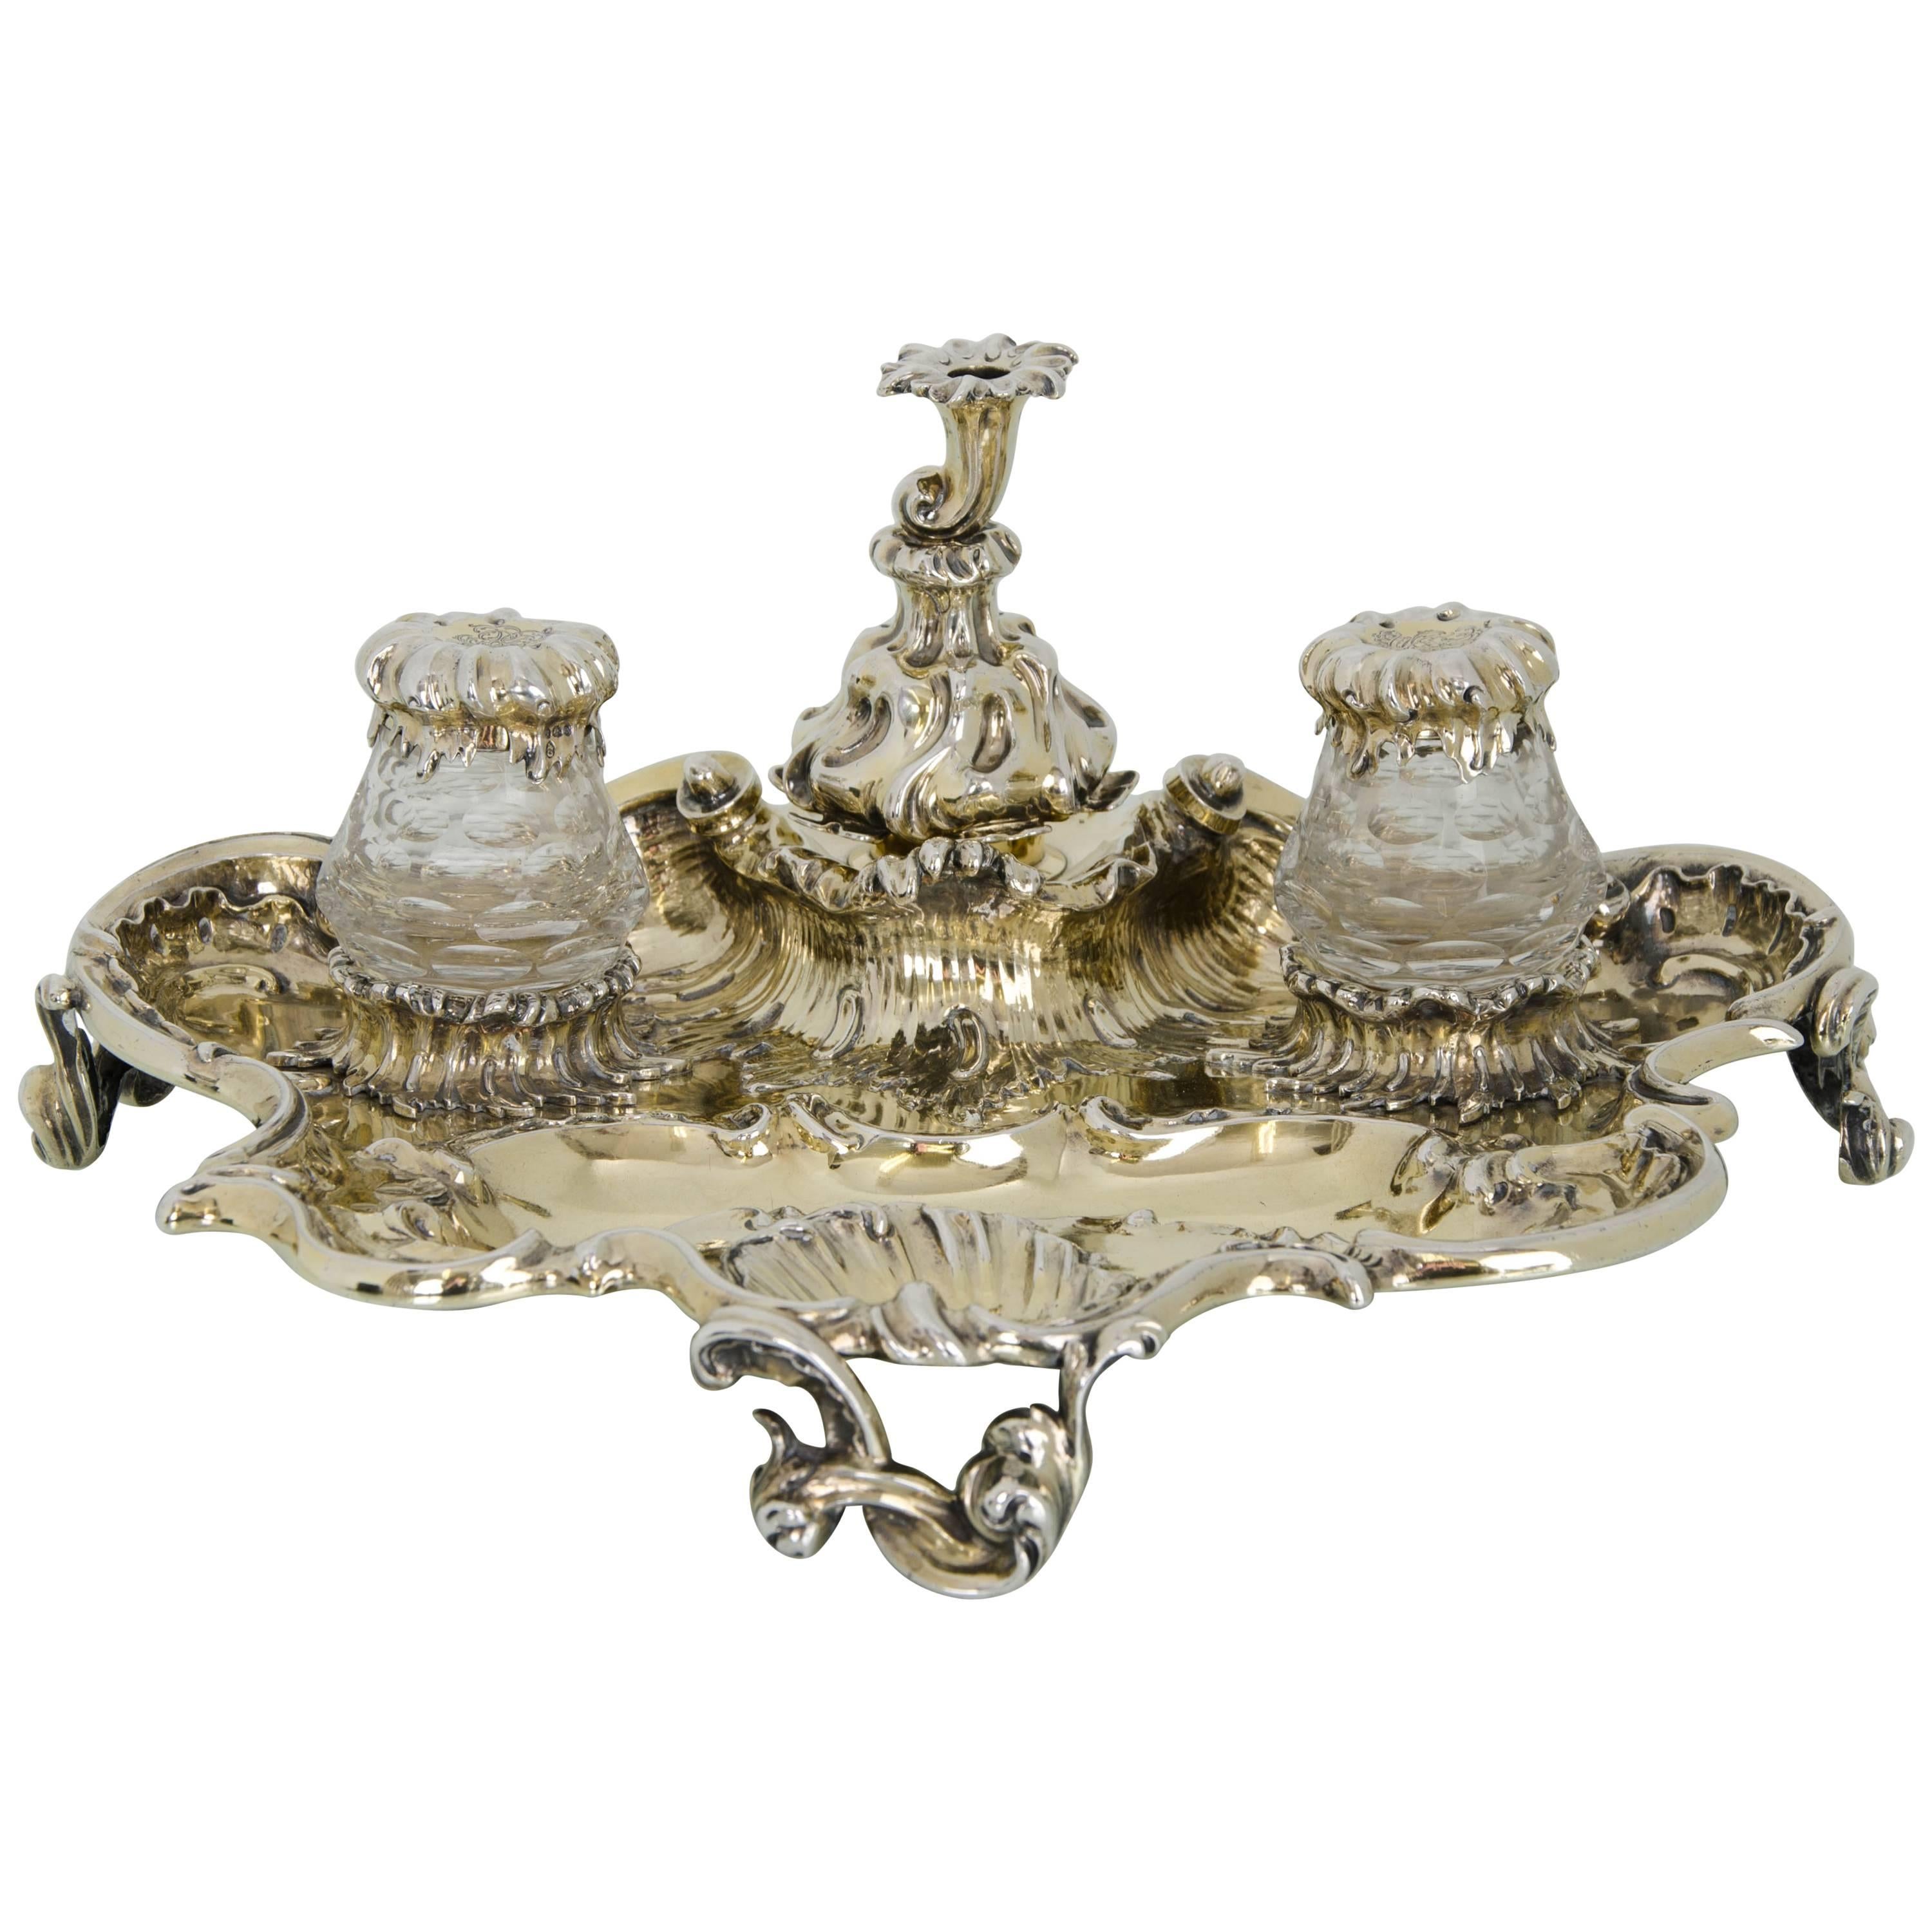 Victorian Antique Silver Gilt 19th Century Desk Inkstand London 1839 Charles Fox For Sale